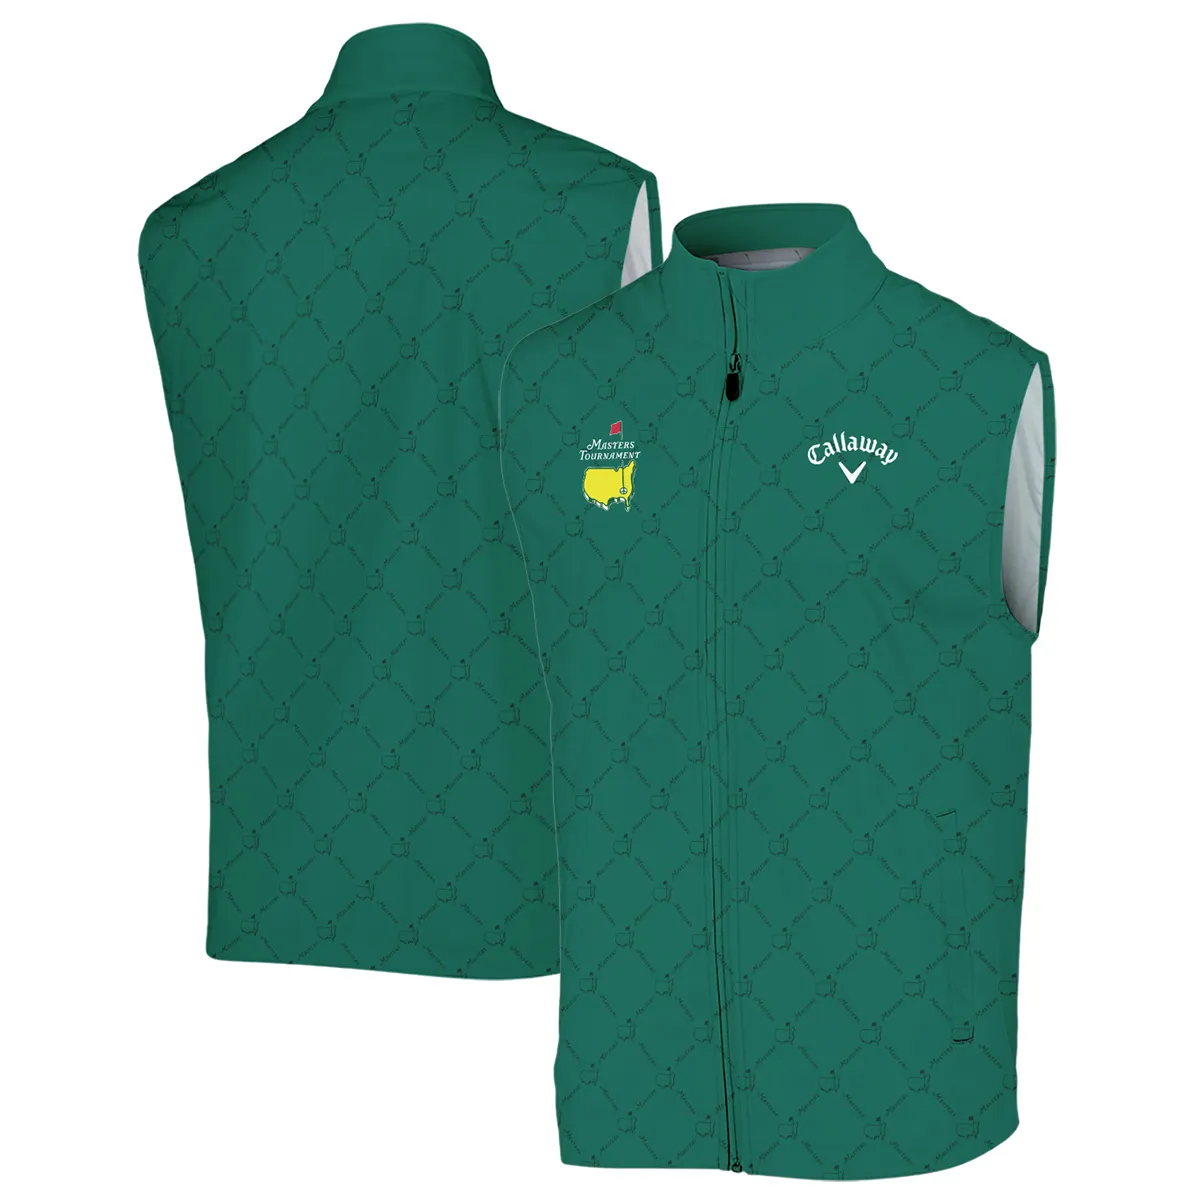 Golf Sport Pattern Color Green Mix Black Masters Tournament Callaway Polo Shirt Style Classic